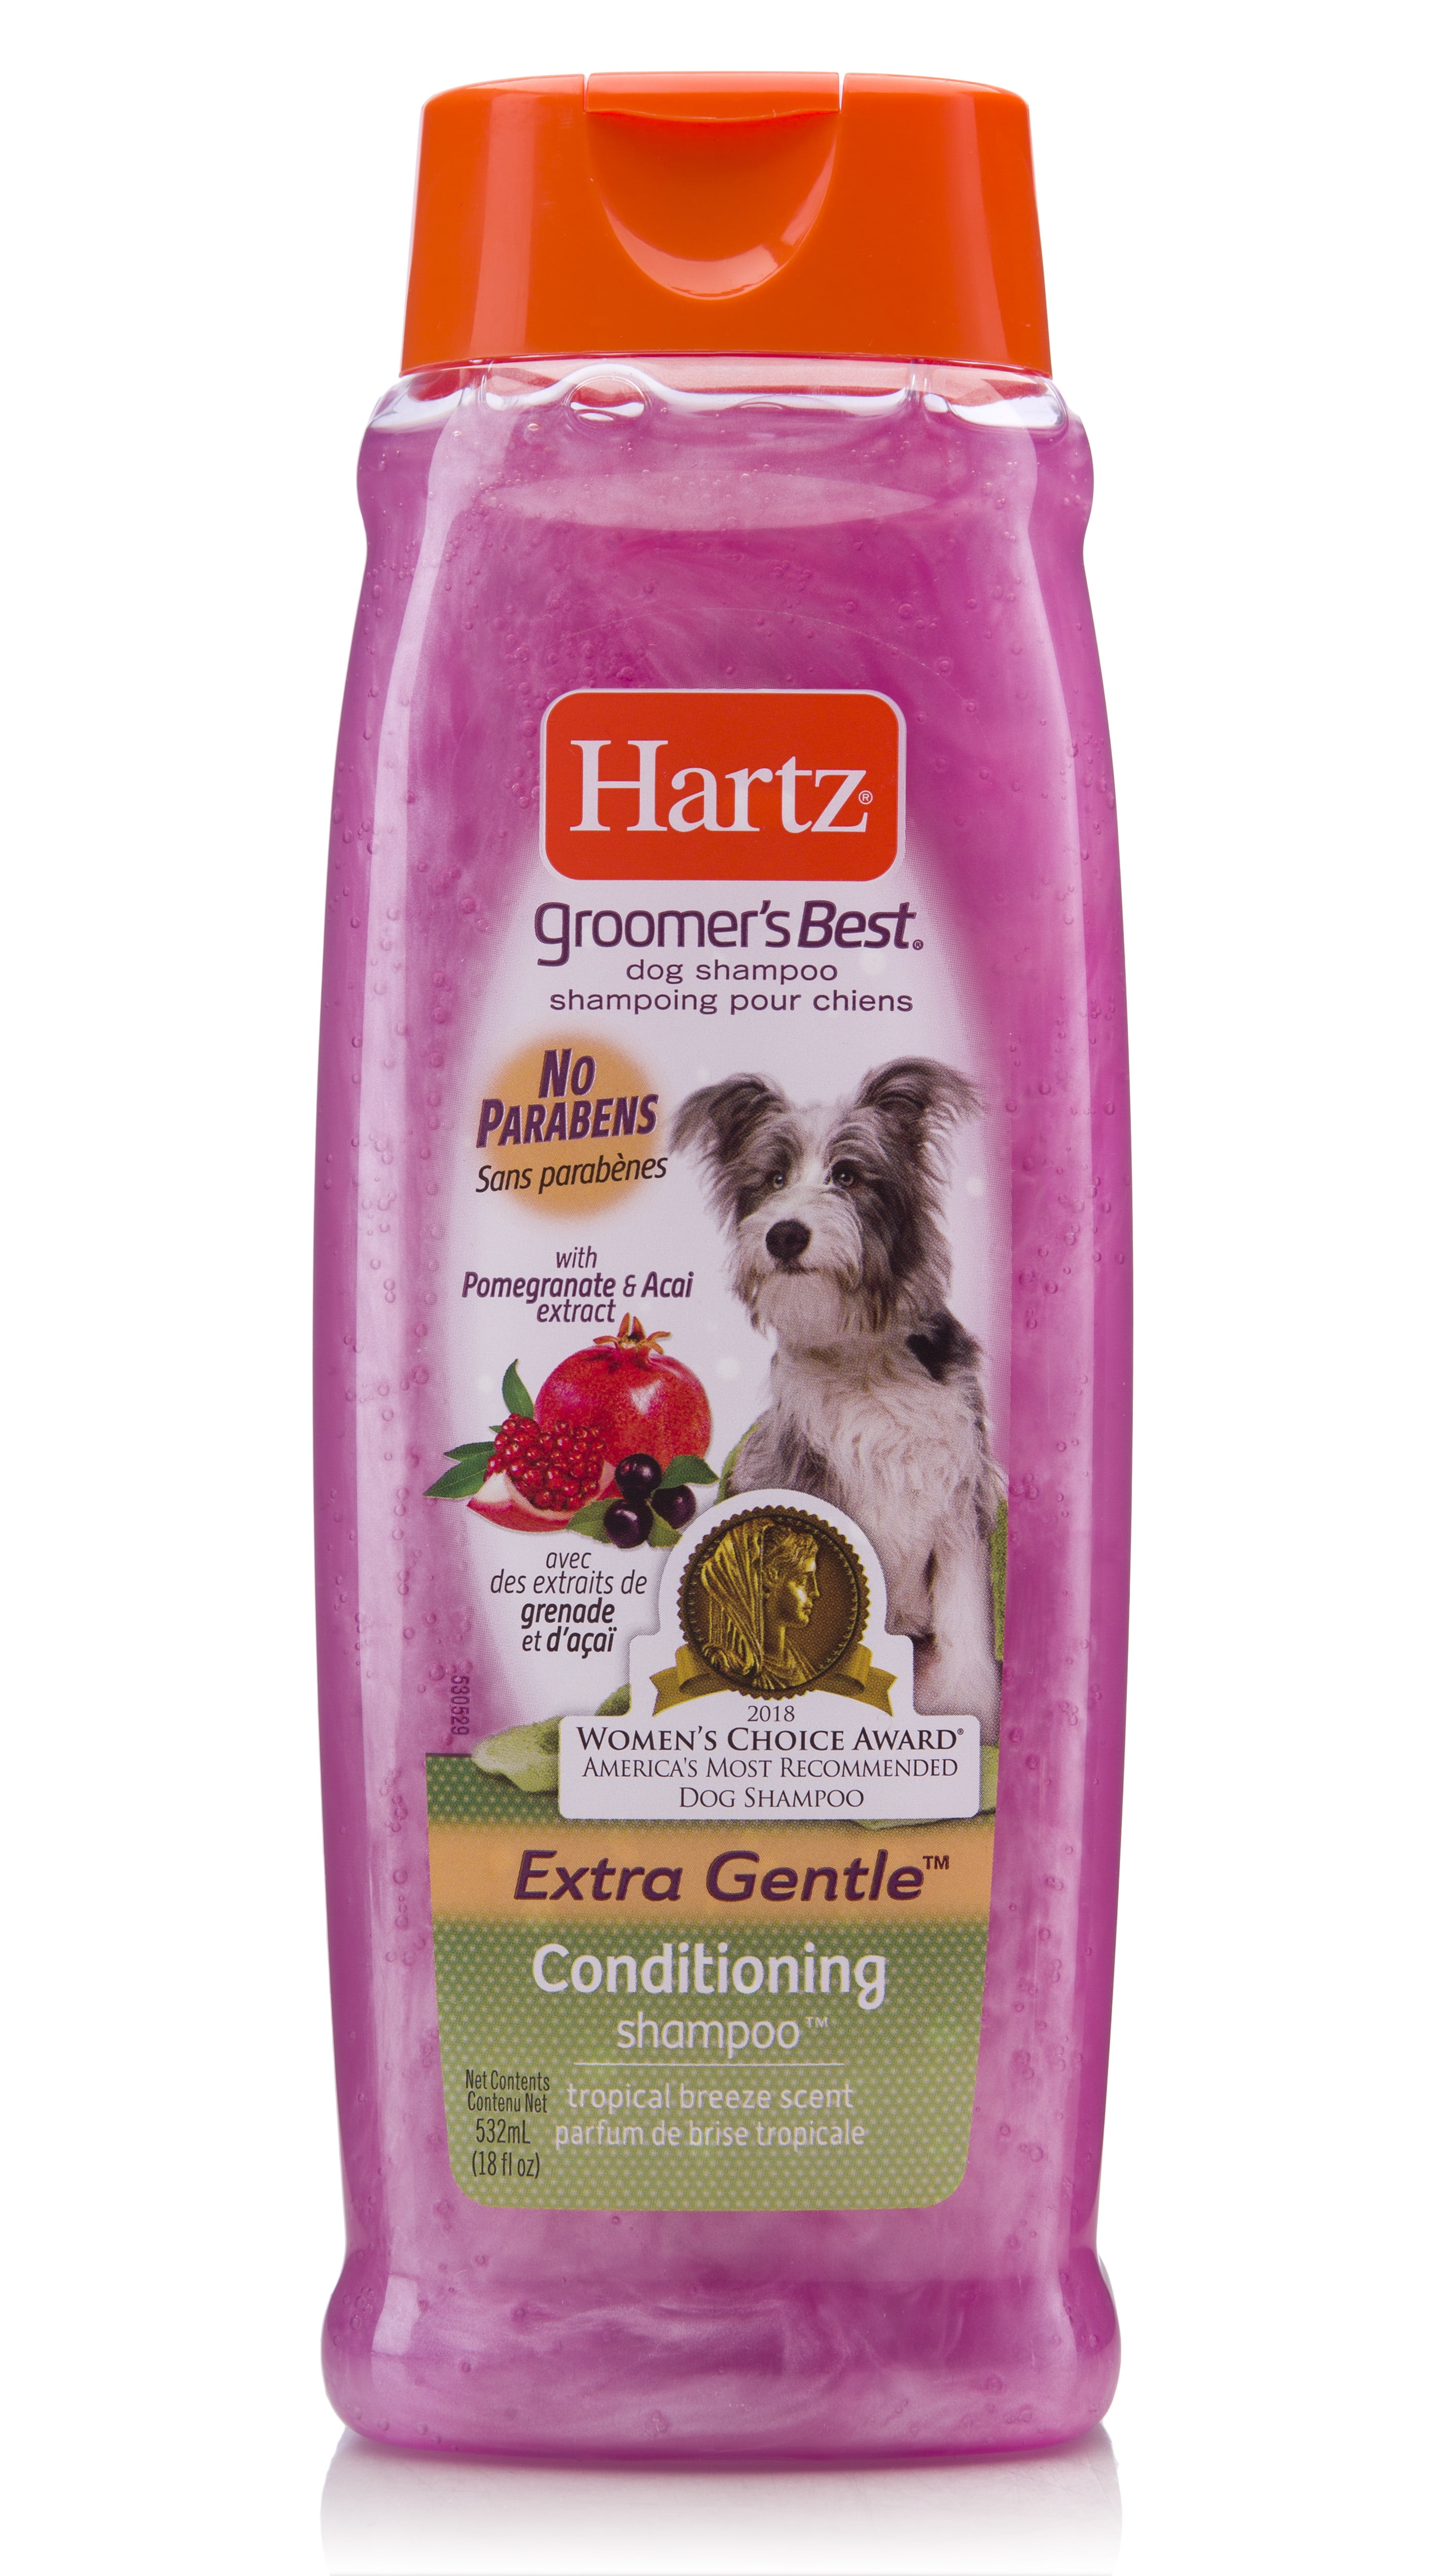  Dog Grooming Products in the world Learn more here 